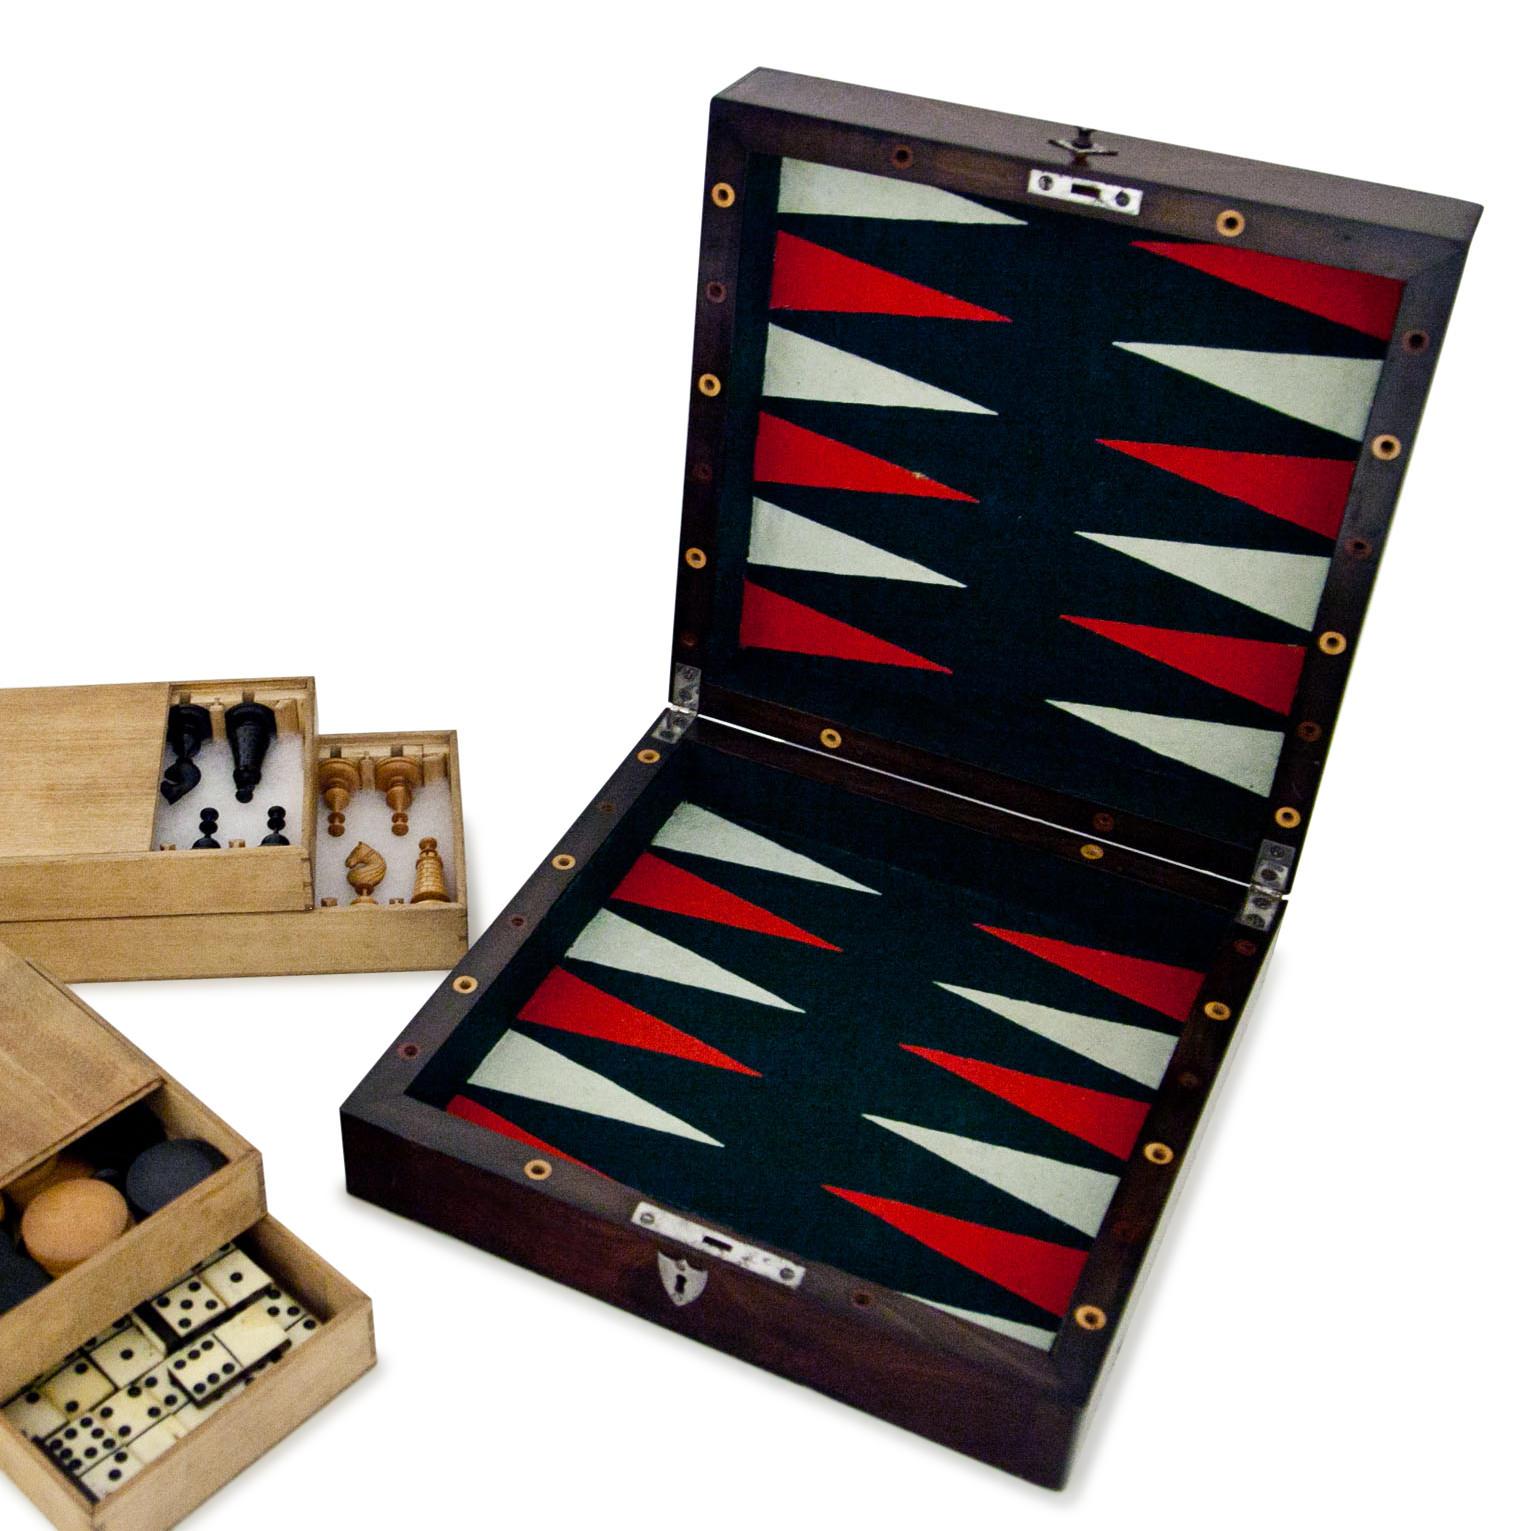 Square game box for backgammon, Domino, chess and Nine men's morris from circa 1780-1800. The playing pieces are carved from maple and ebony, the box is mahogany, and the boards are inlayed with maple and ebony as well.


Dimensions unfolded